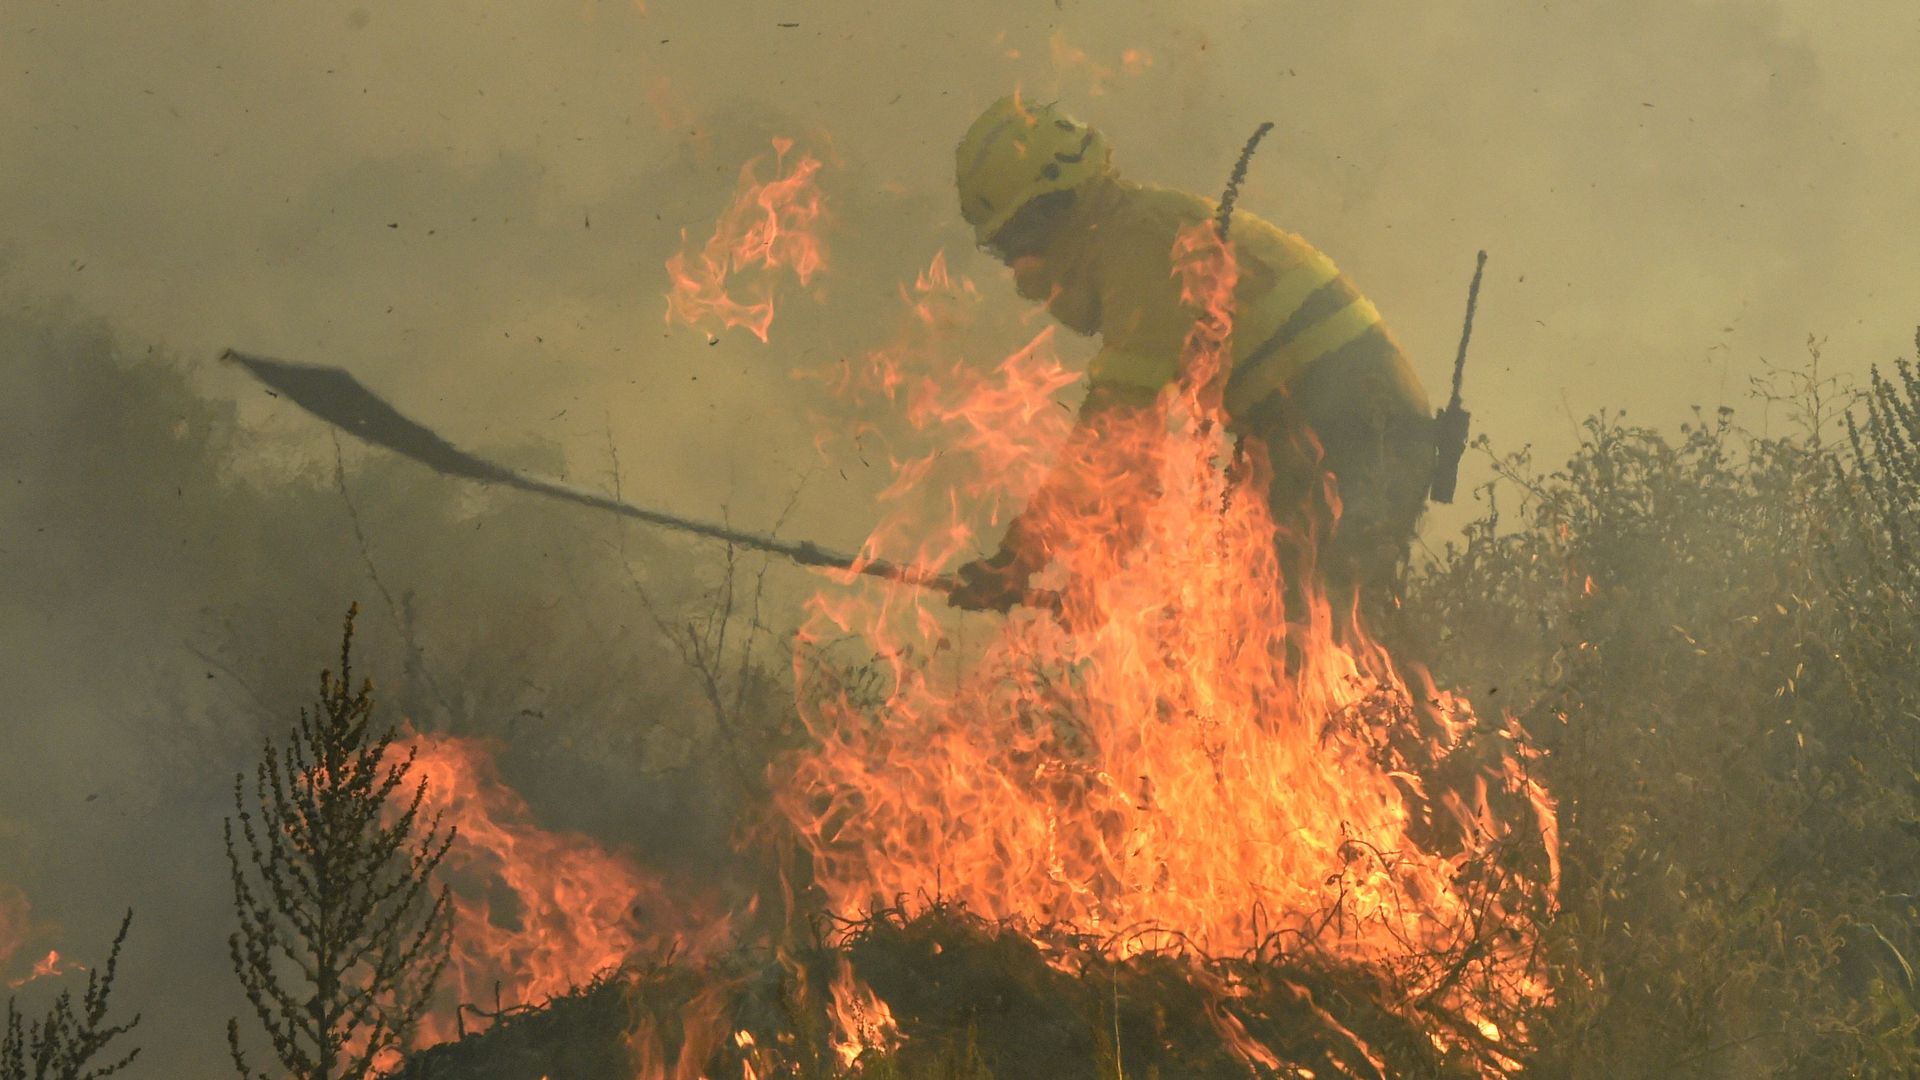 Firefighter uses a shovel to try to help mop up burning flames during a heat wave in Spain.